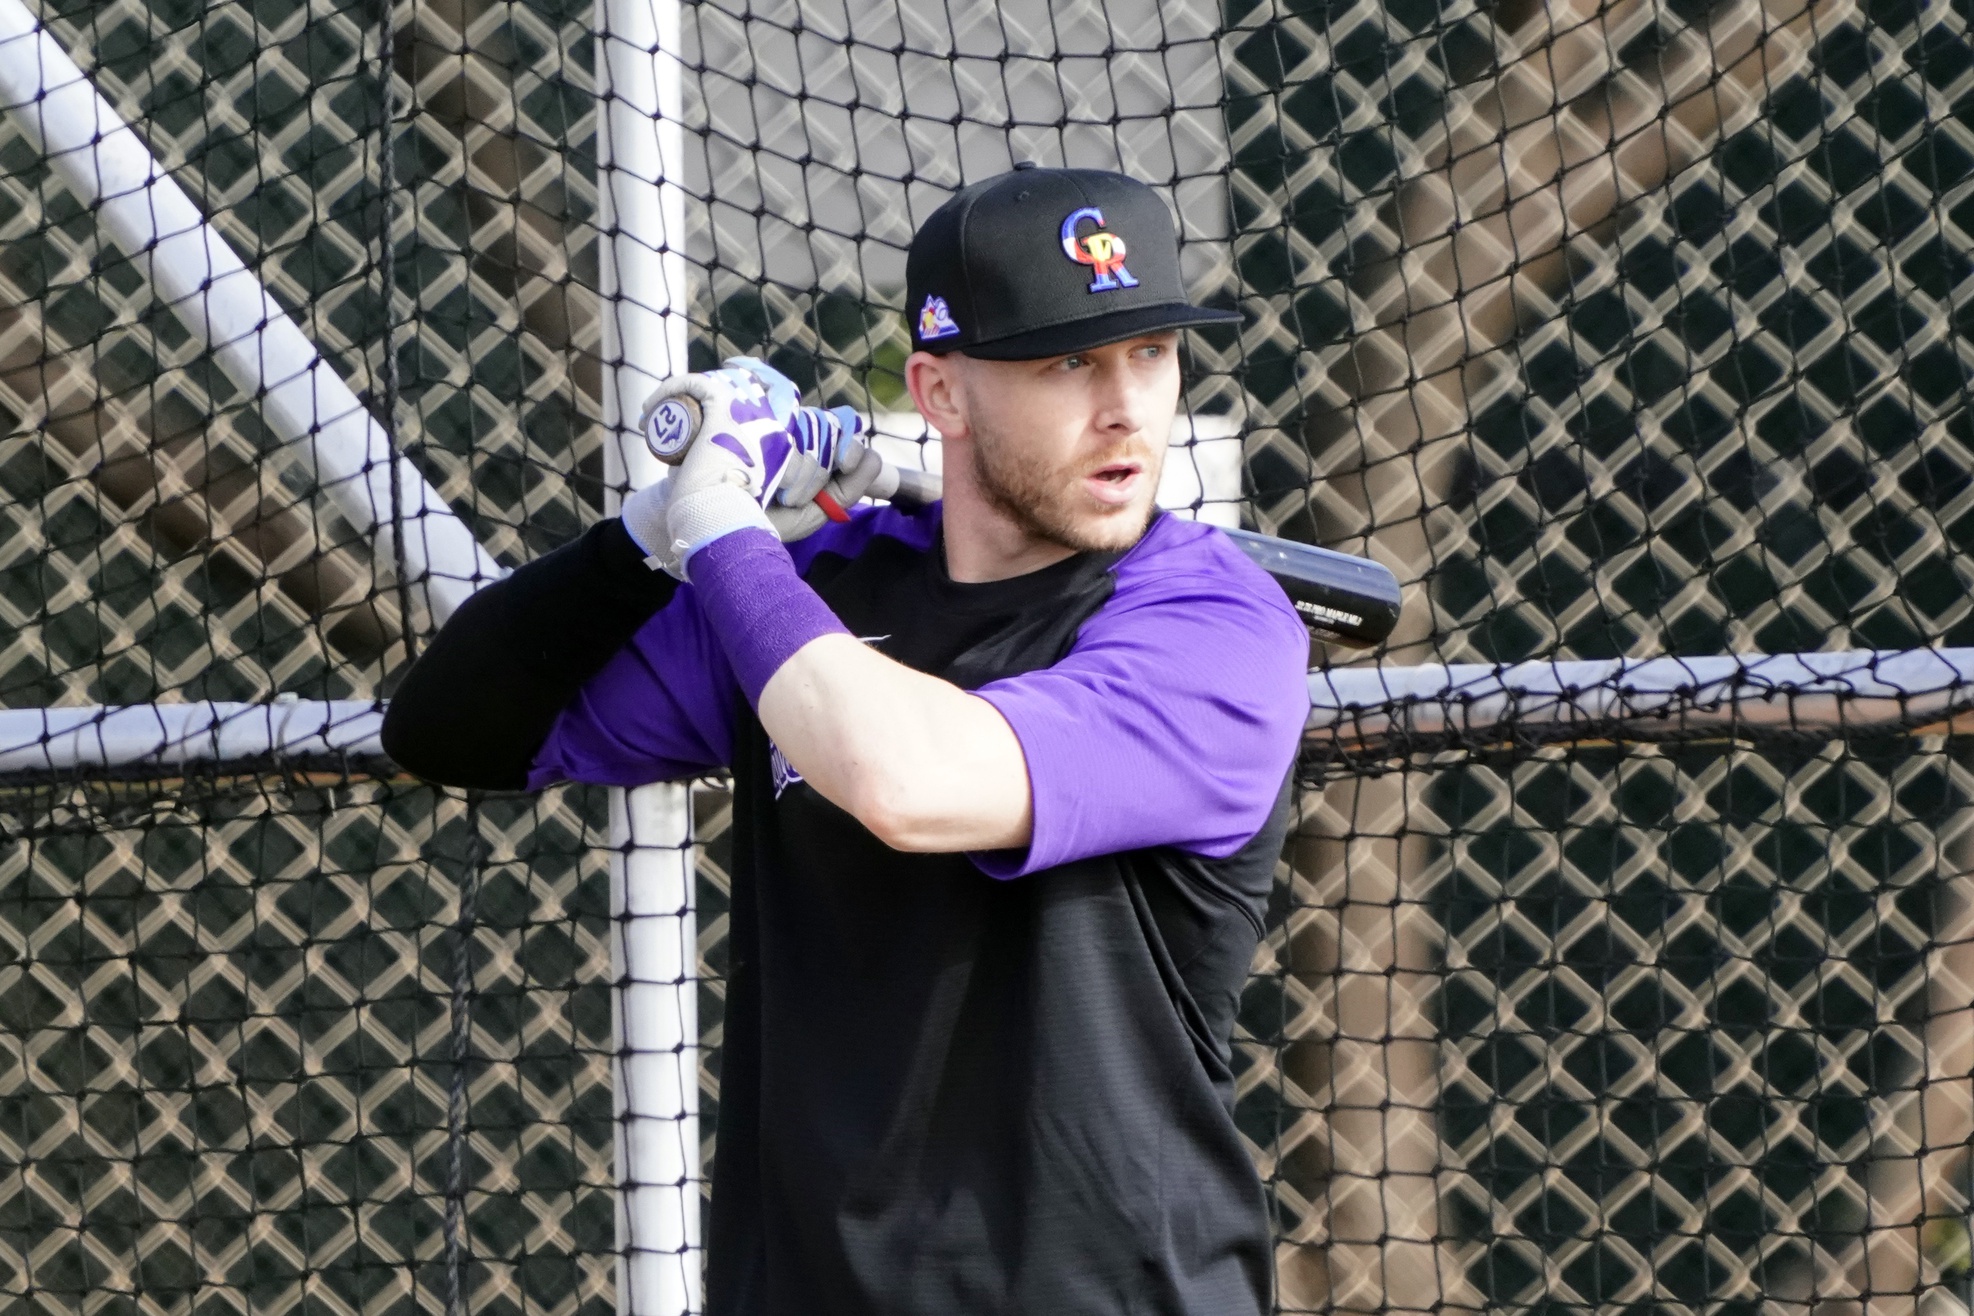 Trevor Story: What you need to know about Rockies' breakout performer